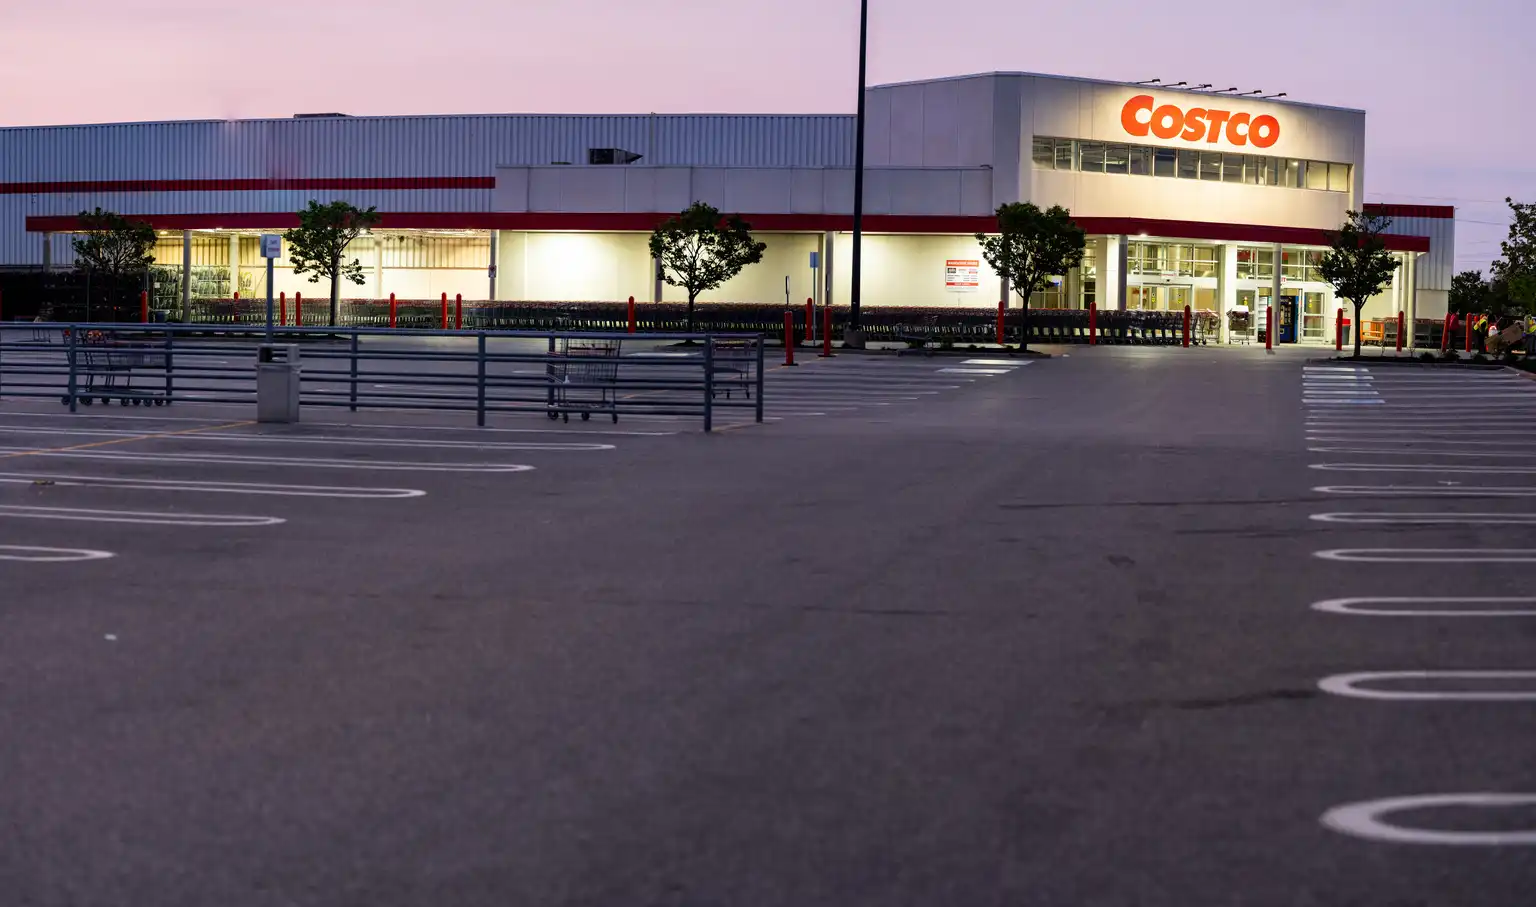 Costco: Looking Overvalued, Maybe Time To Checkout? - Seeking Alpha